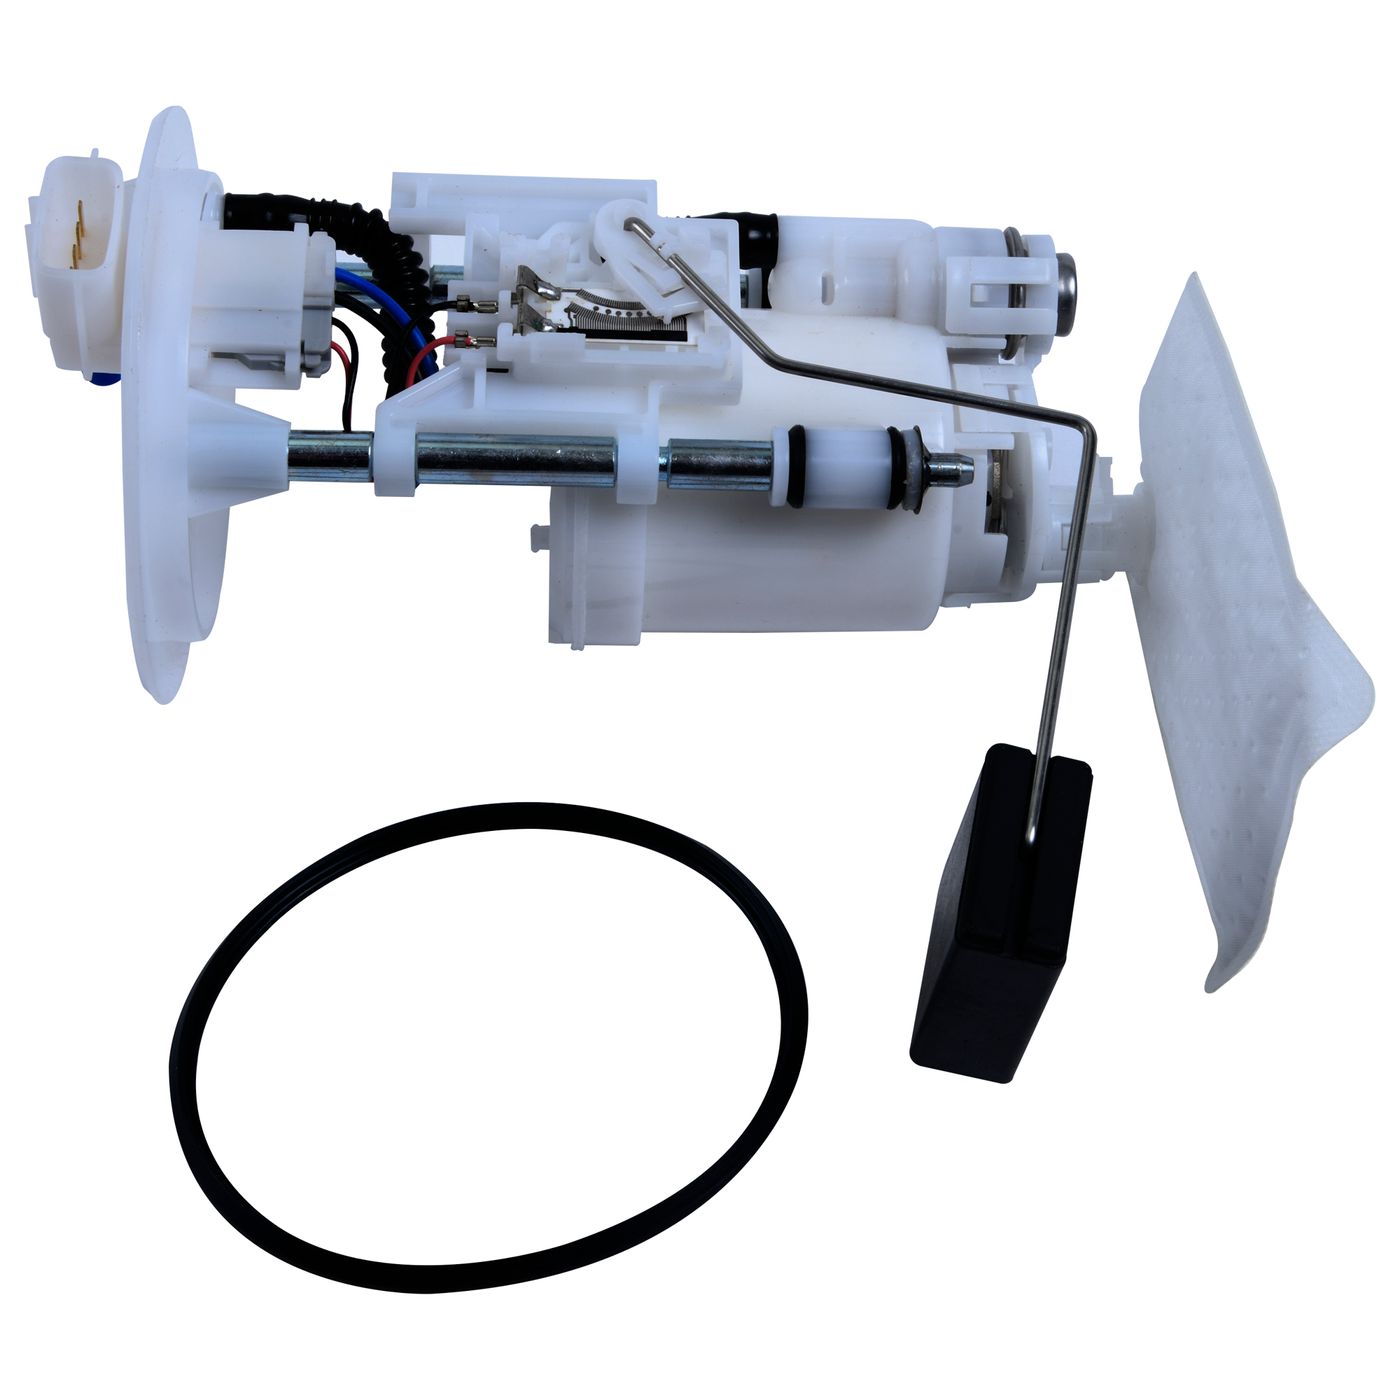 Wrp Fuel Pump Modules - WRP471036 image